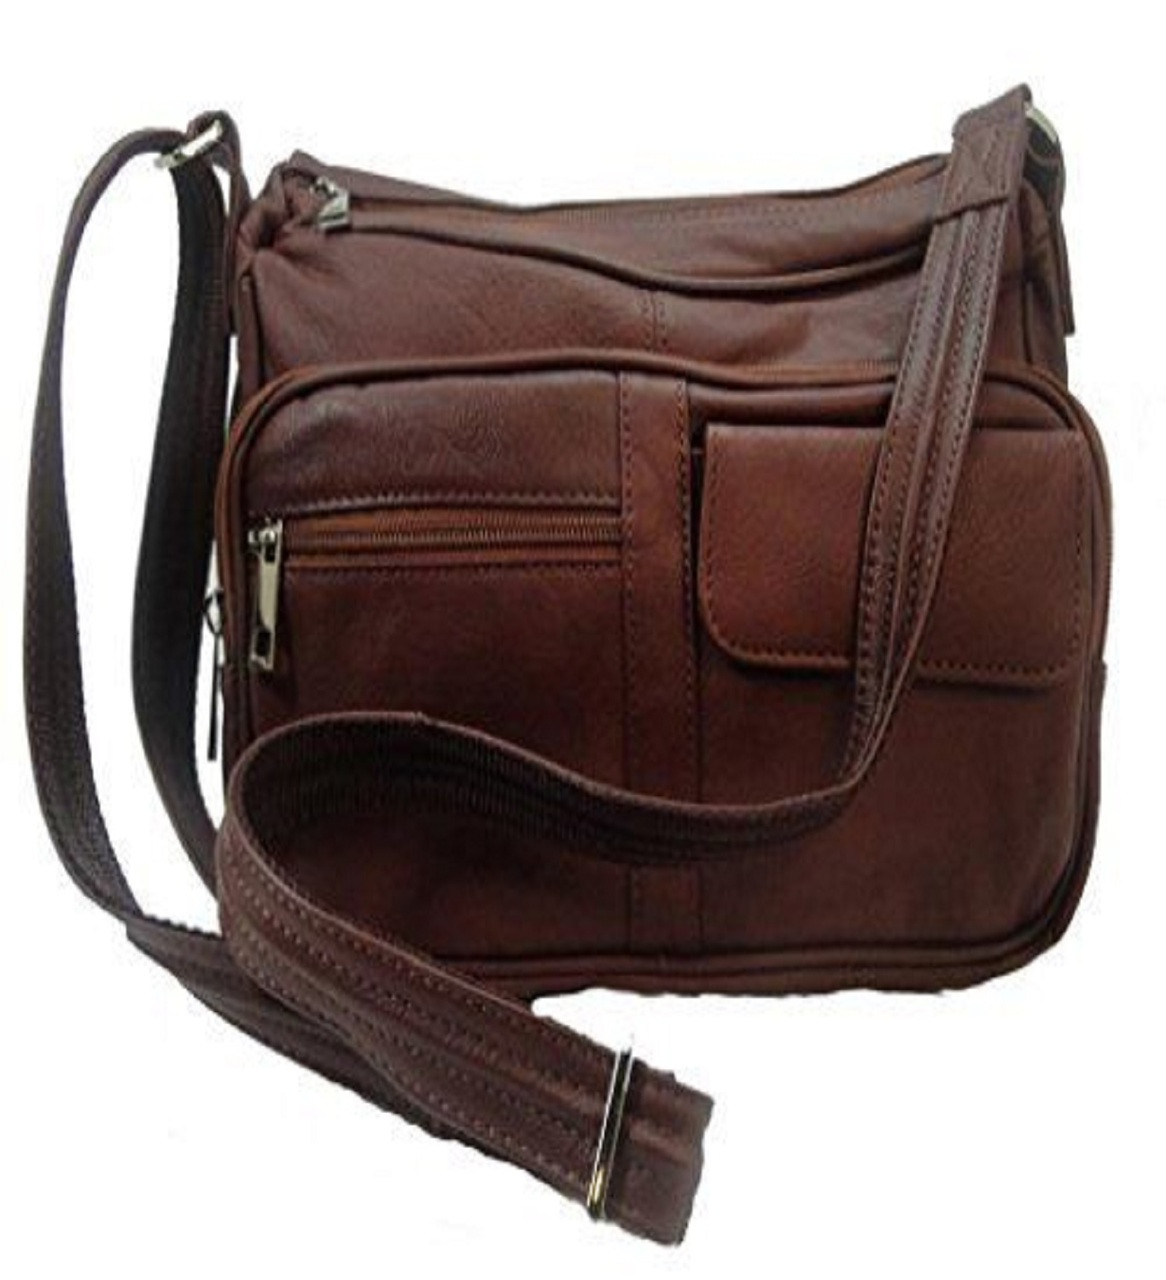 Concealed Carry Leather Gun Purse W Organizer And Shoulder Strap